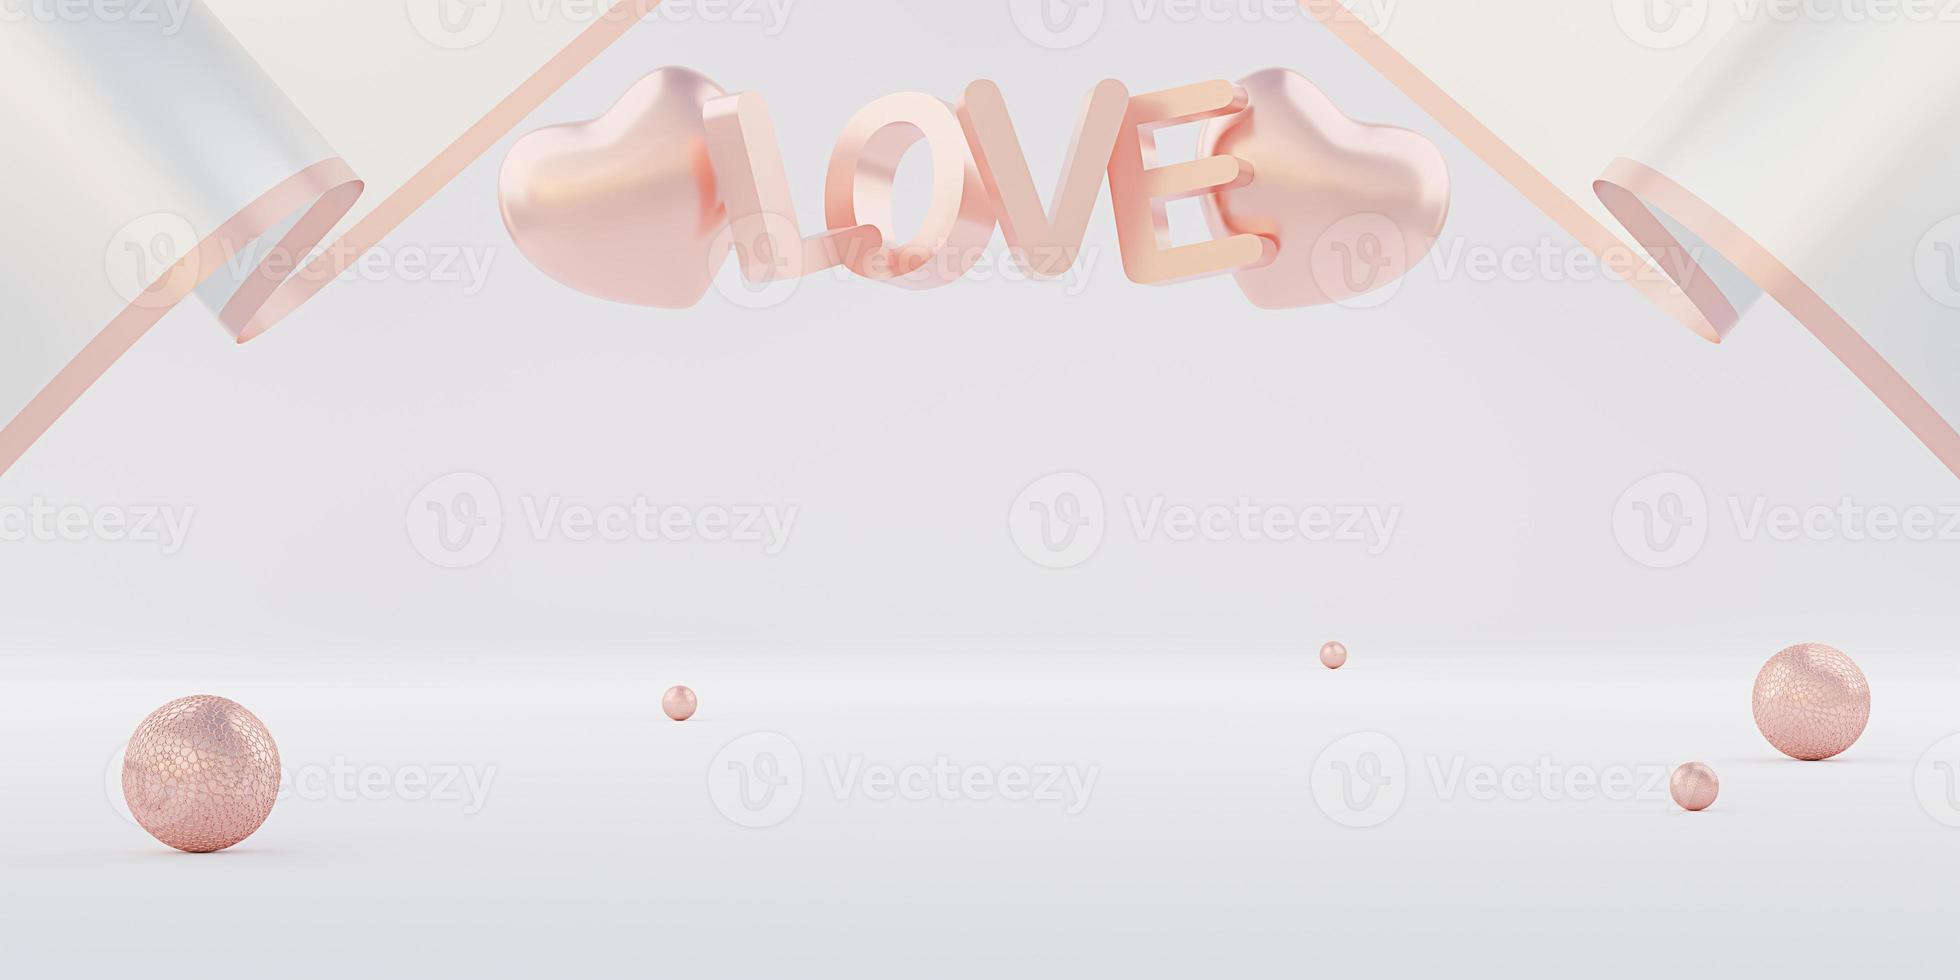 valentines day background soft colors hearts and gifts sweet colors 3d illustration photo